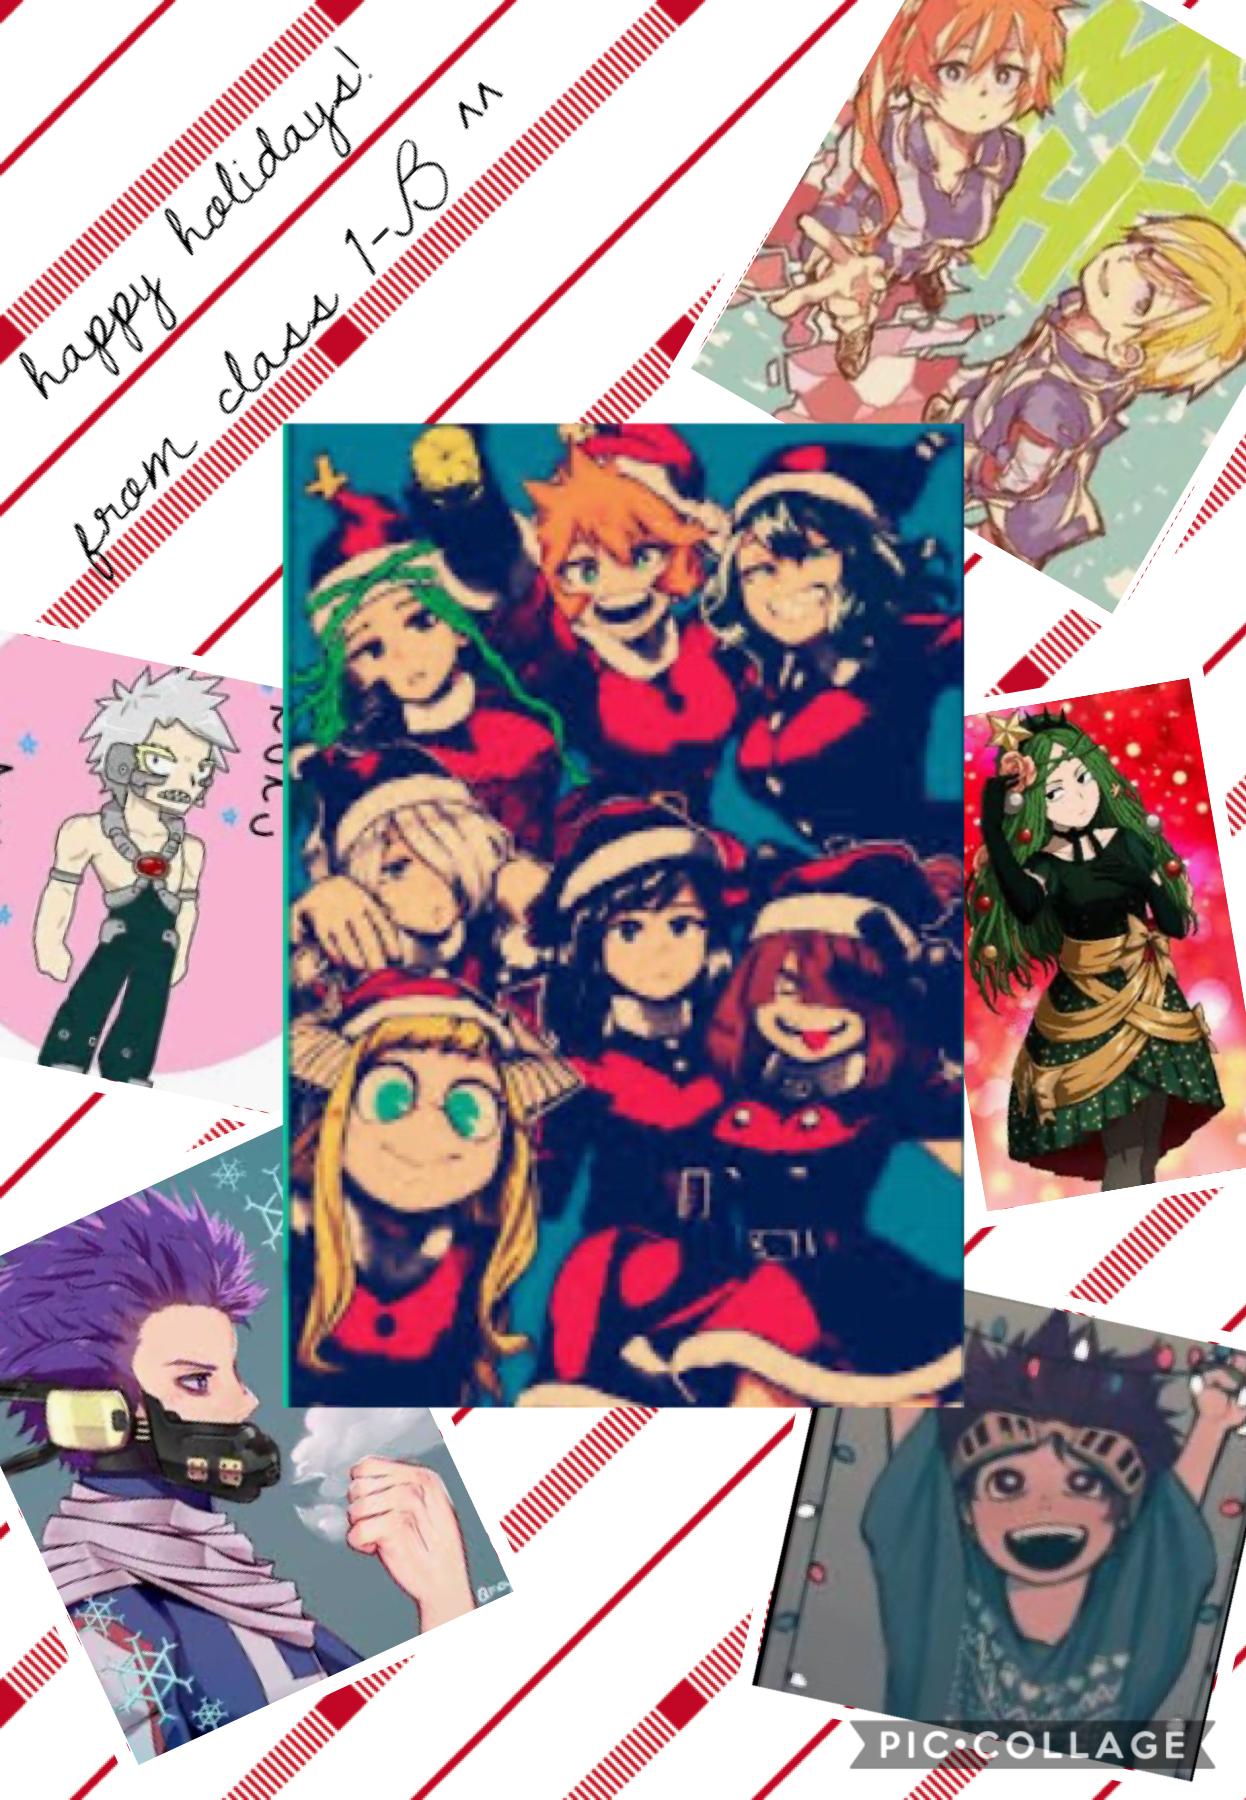 HAPPY HOLIDAYS FROM CLASS 1-A AND 1-B!!!! (there are like no pictures for the poor beans ;-;)